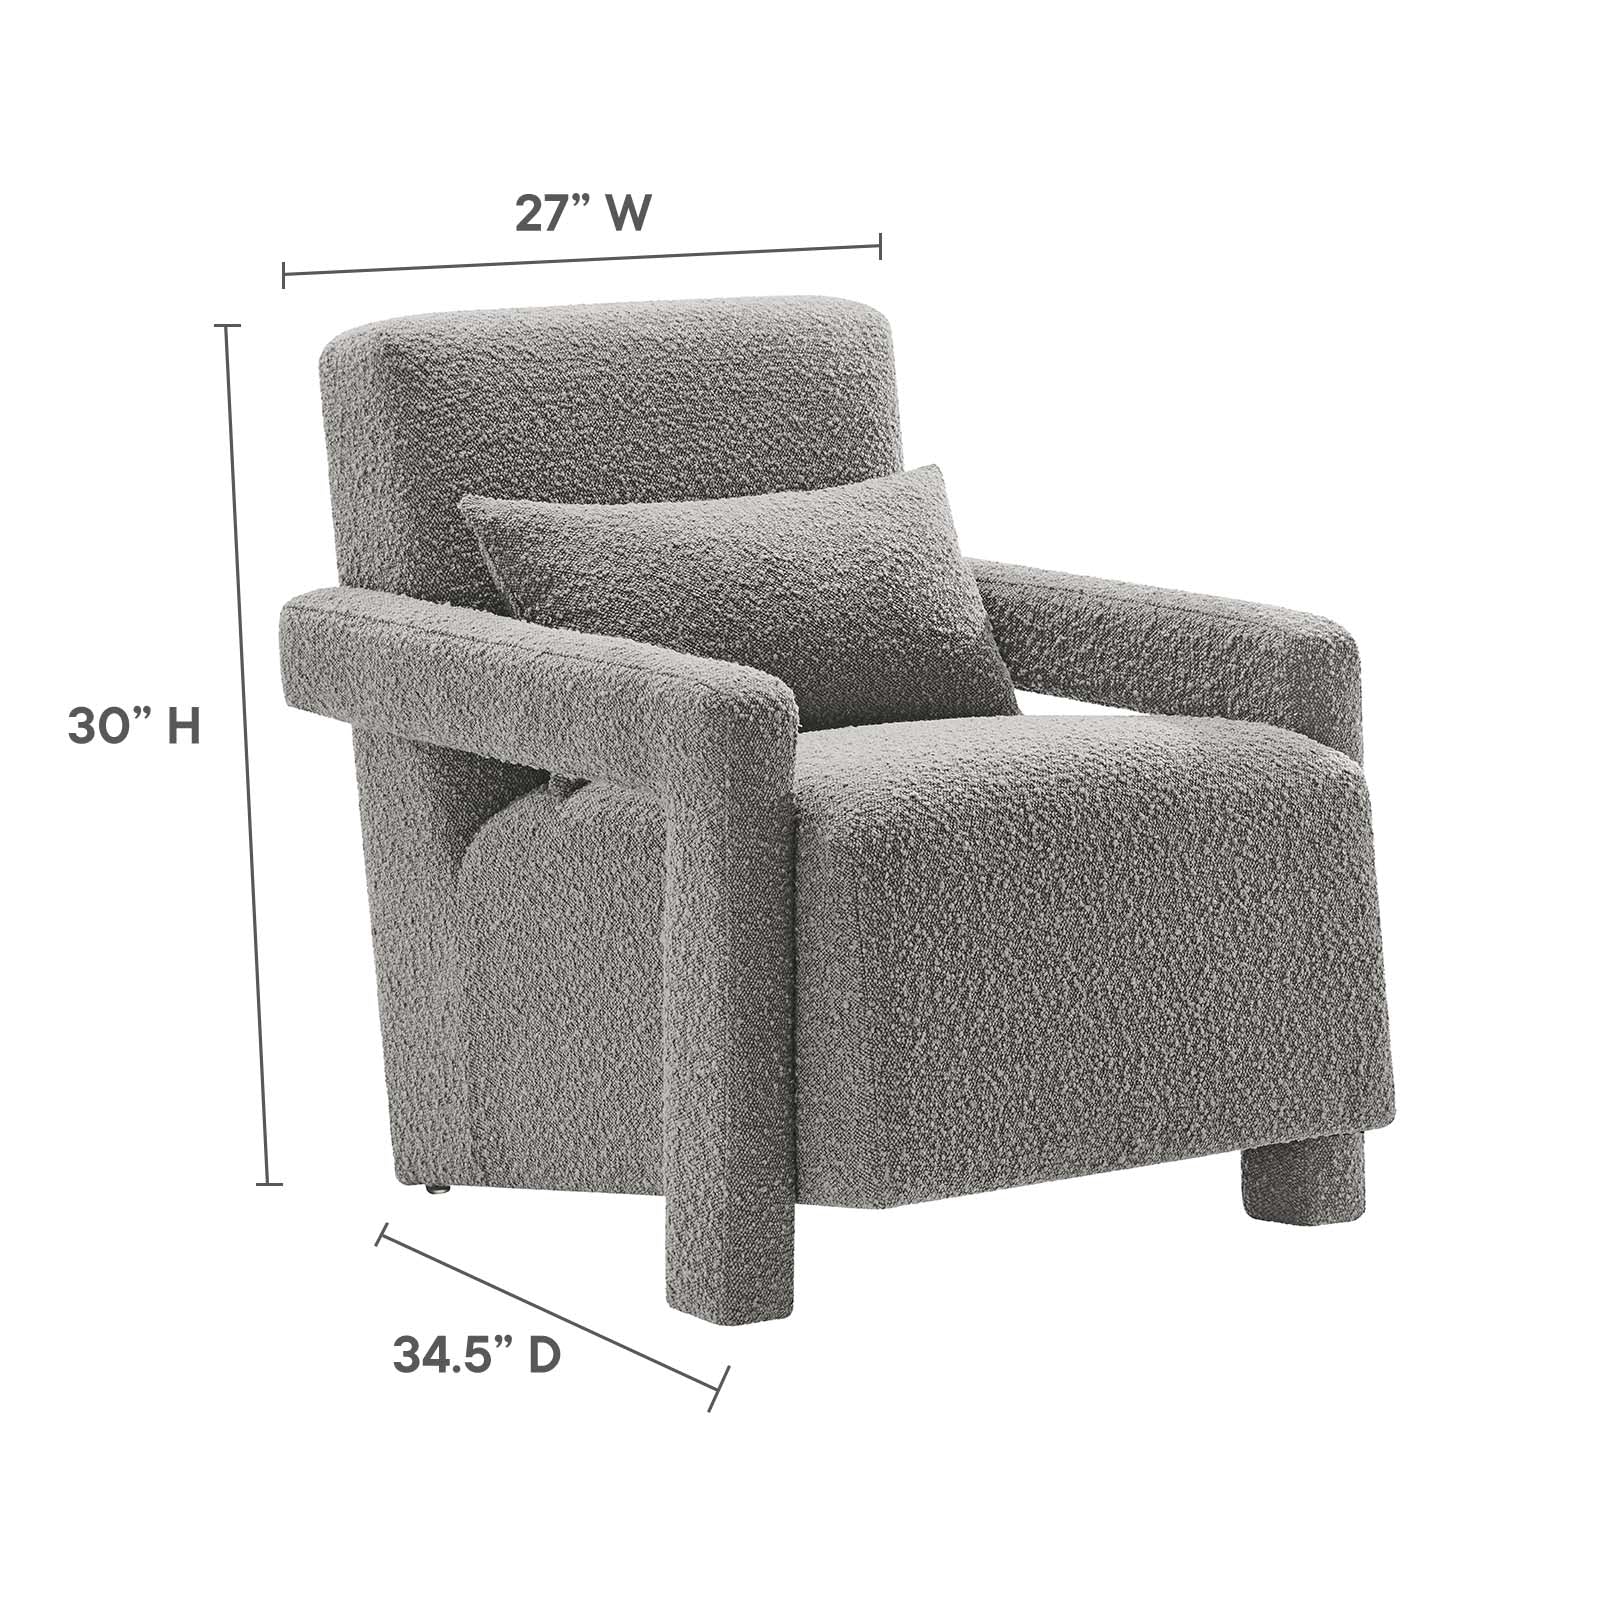 Mirage Boucle Upholstered Armchair - East Shore Modern Home Furnishings